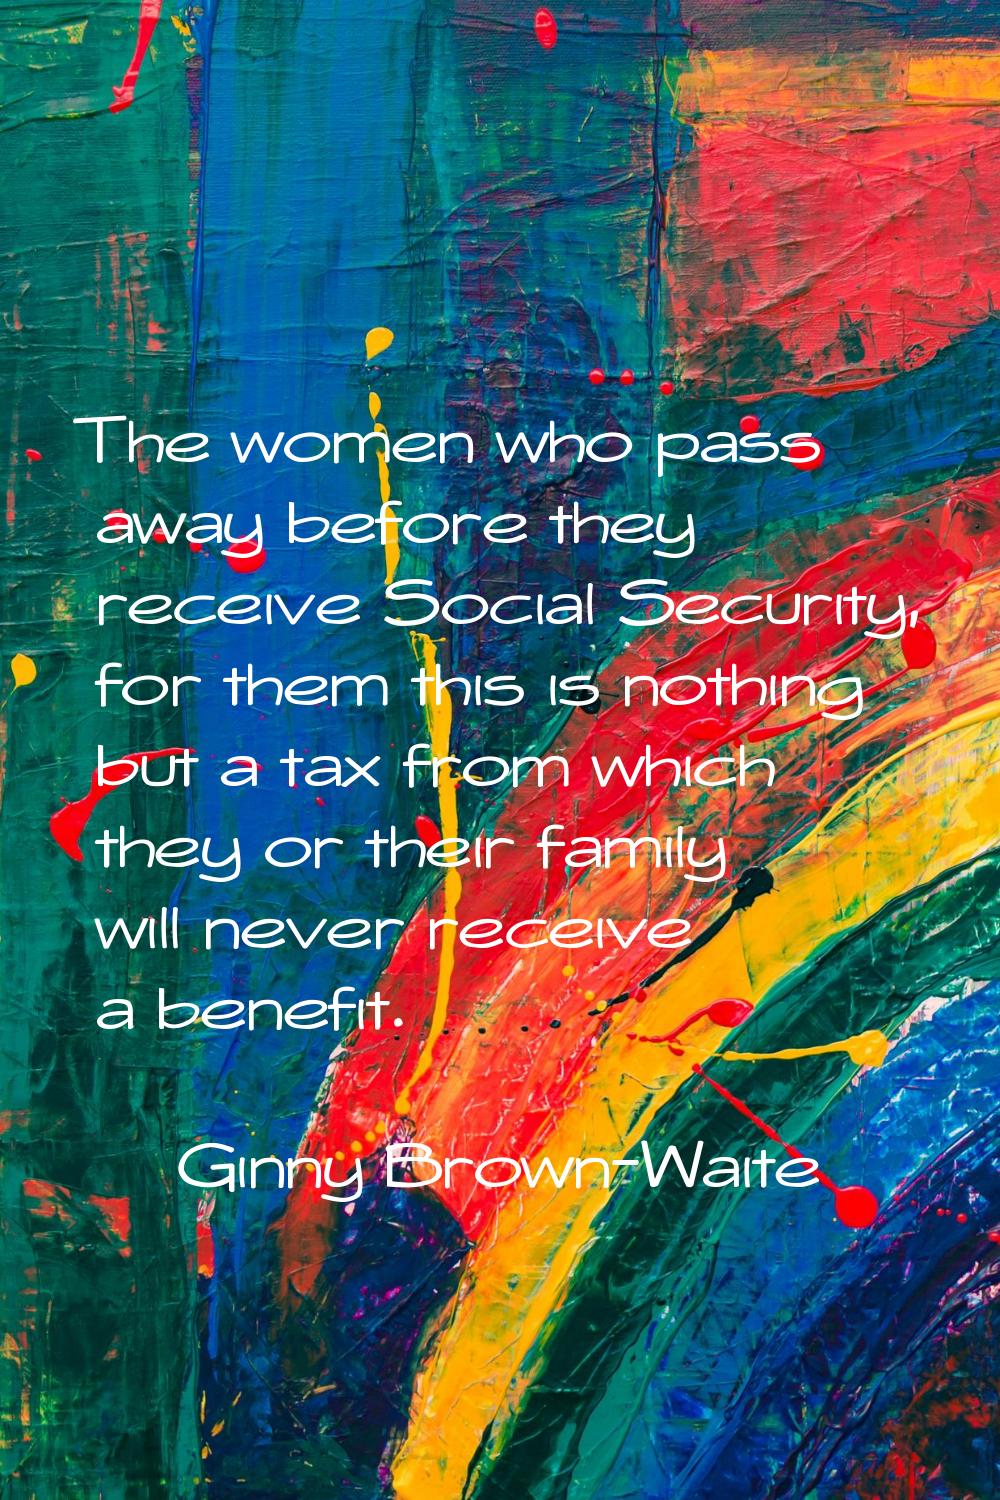 The women who pass away before they receive Social Security, for them this is nothing but a tax fro